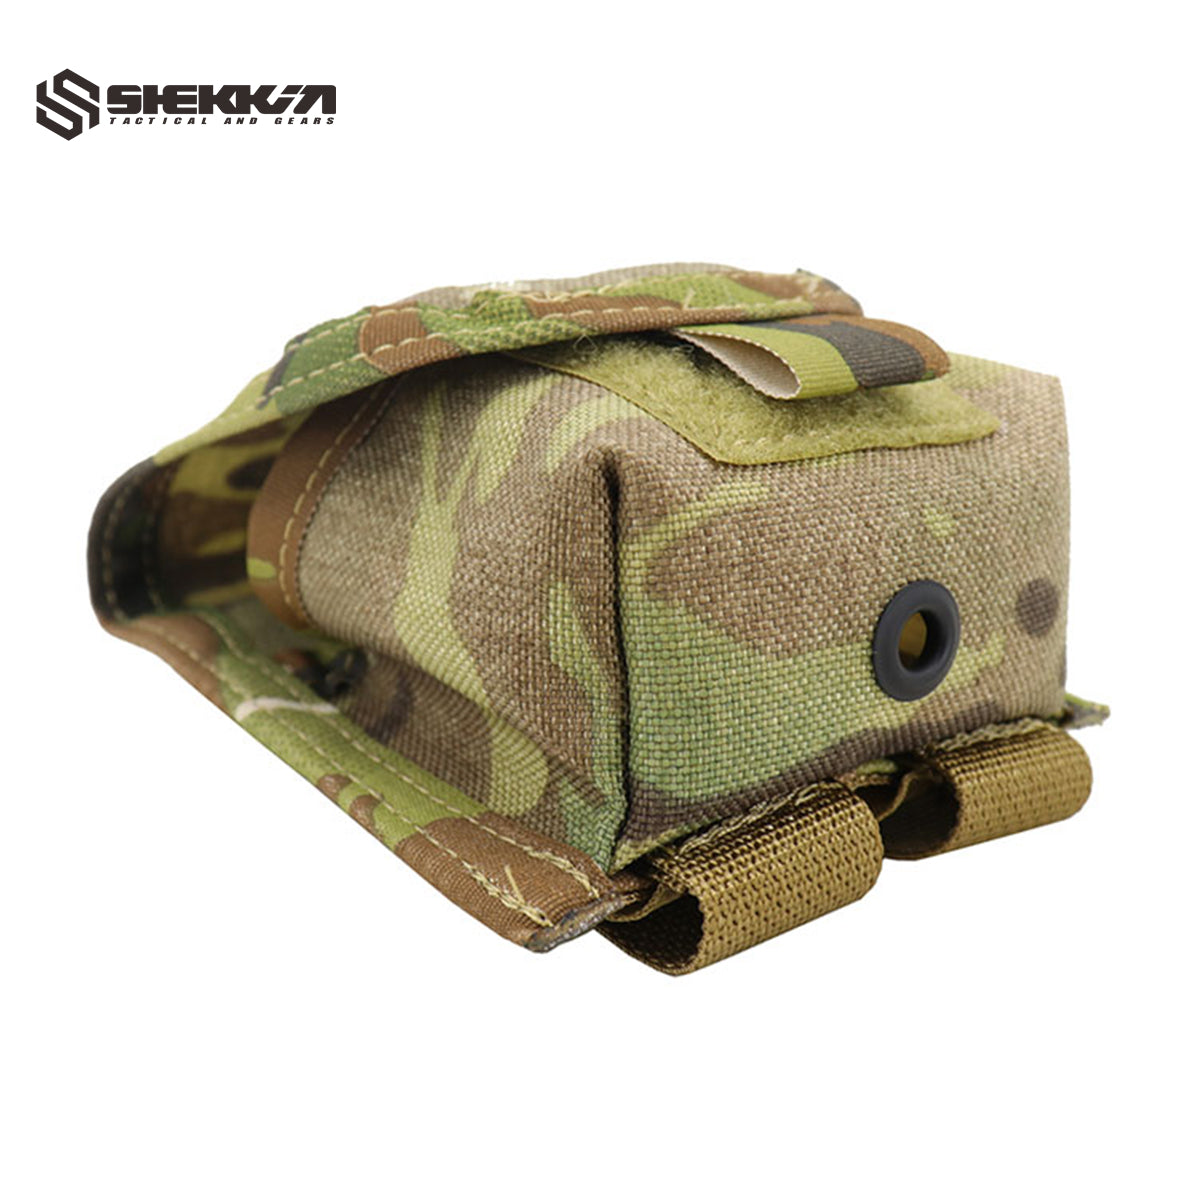 Multicam Paraclete style Frag Pouch - Shekkin Gears